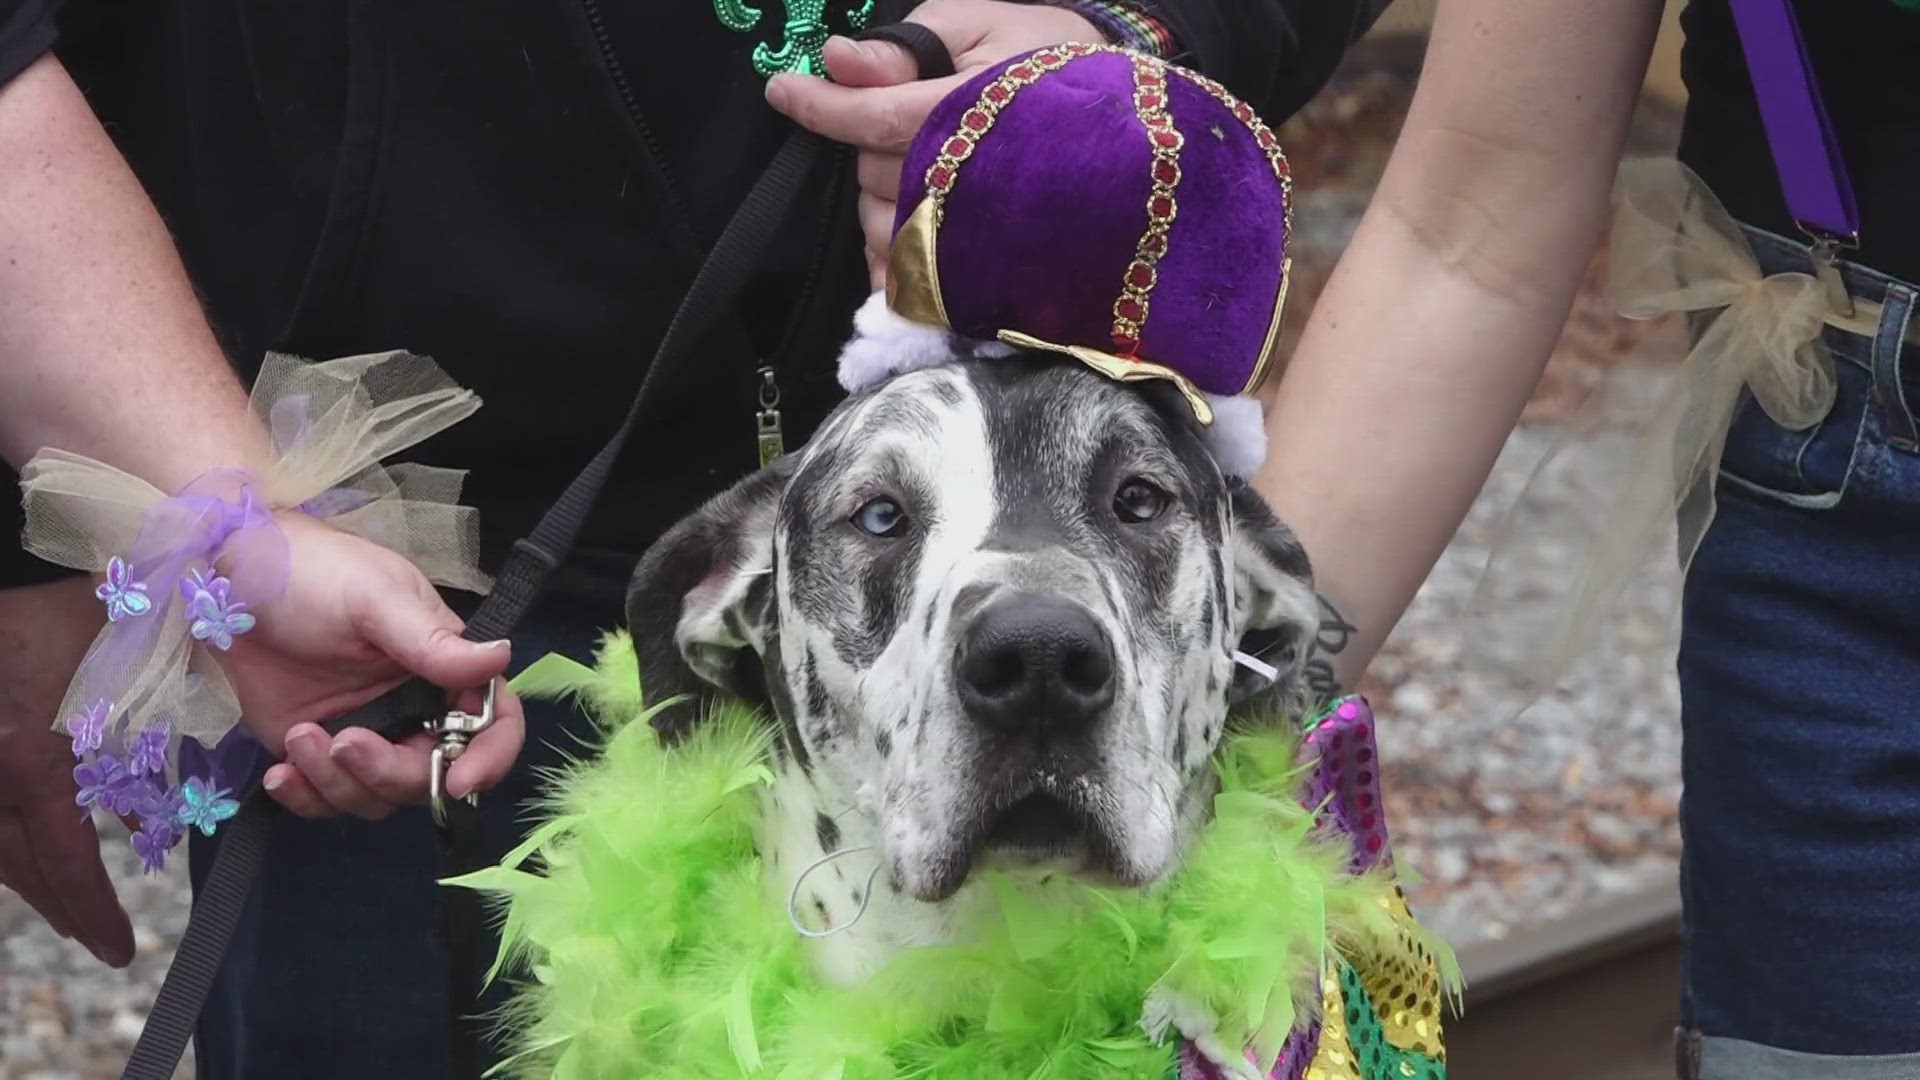 The 17th annual Mardi Growl included the annual pet parade, around 100 vendors, food trucks, games and fun for humans and dogs alike.